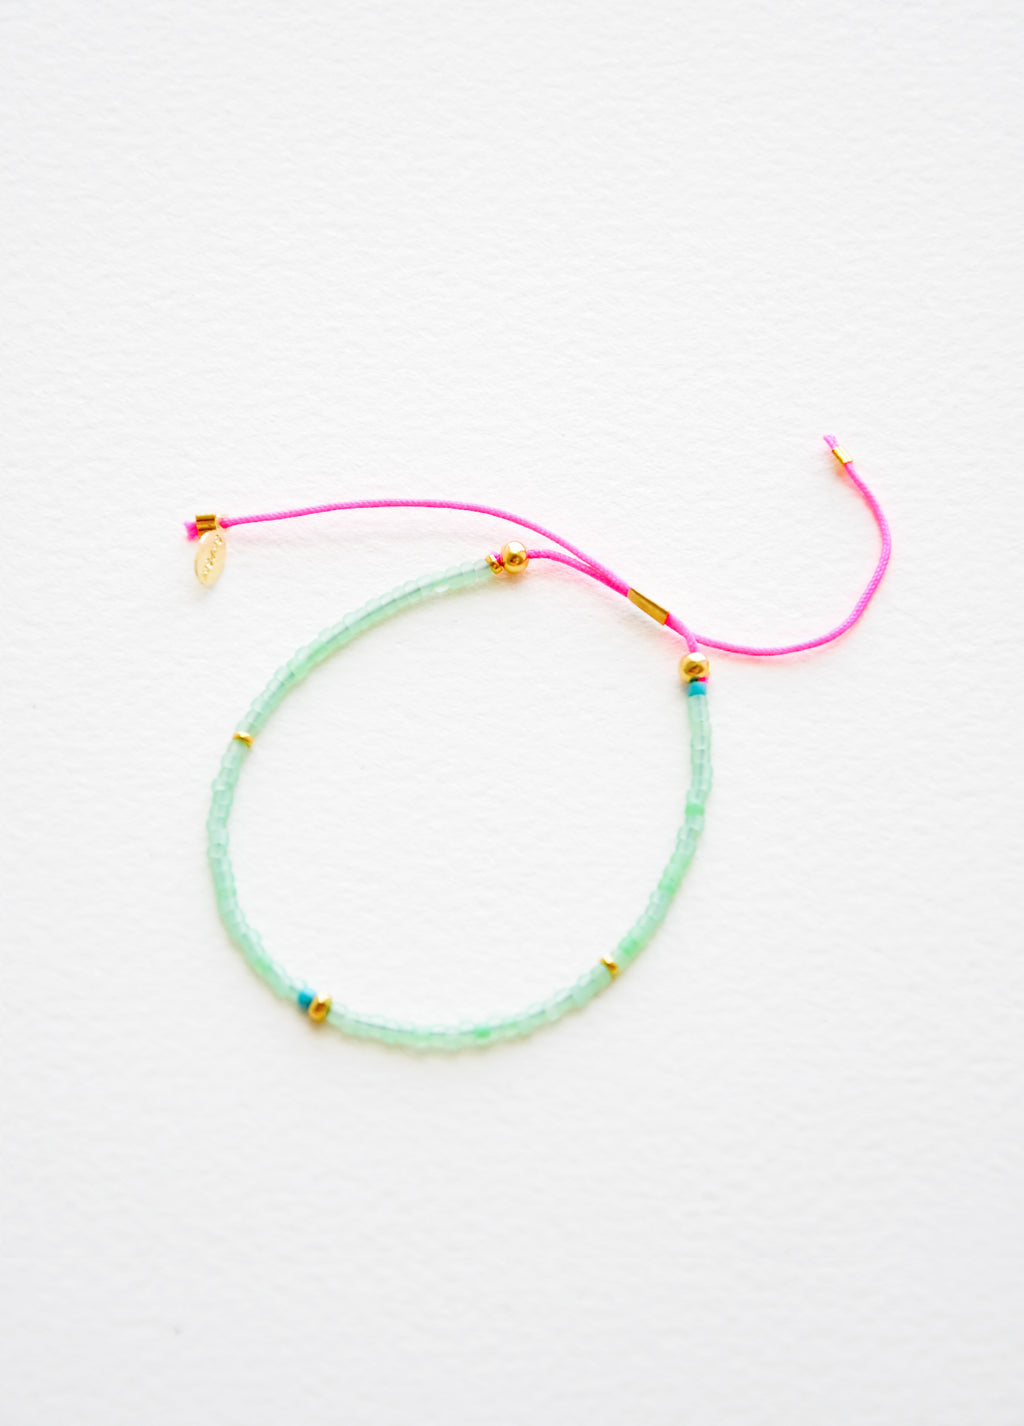 Sea Green / Neon Pink: Frosted Seed Beaded Bracelet in Sea Green / Neon Pink - LEIF